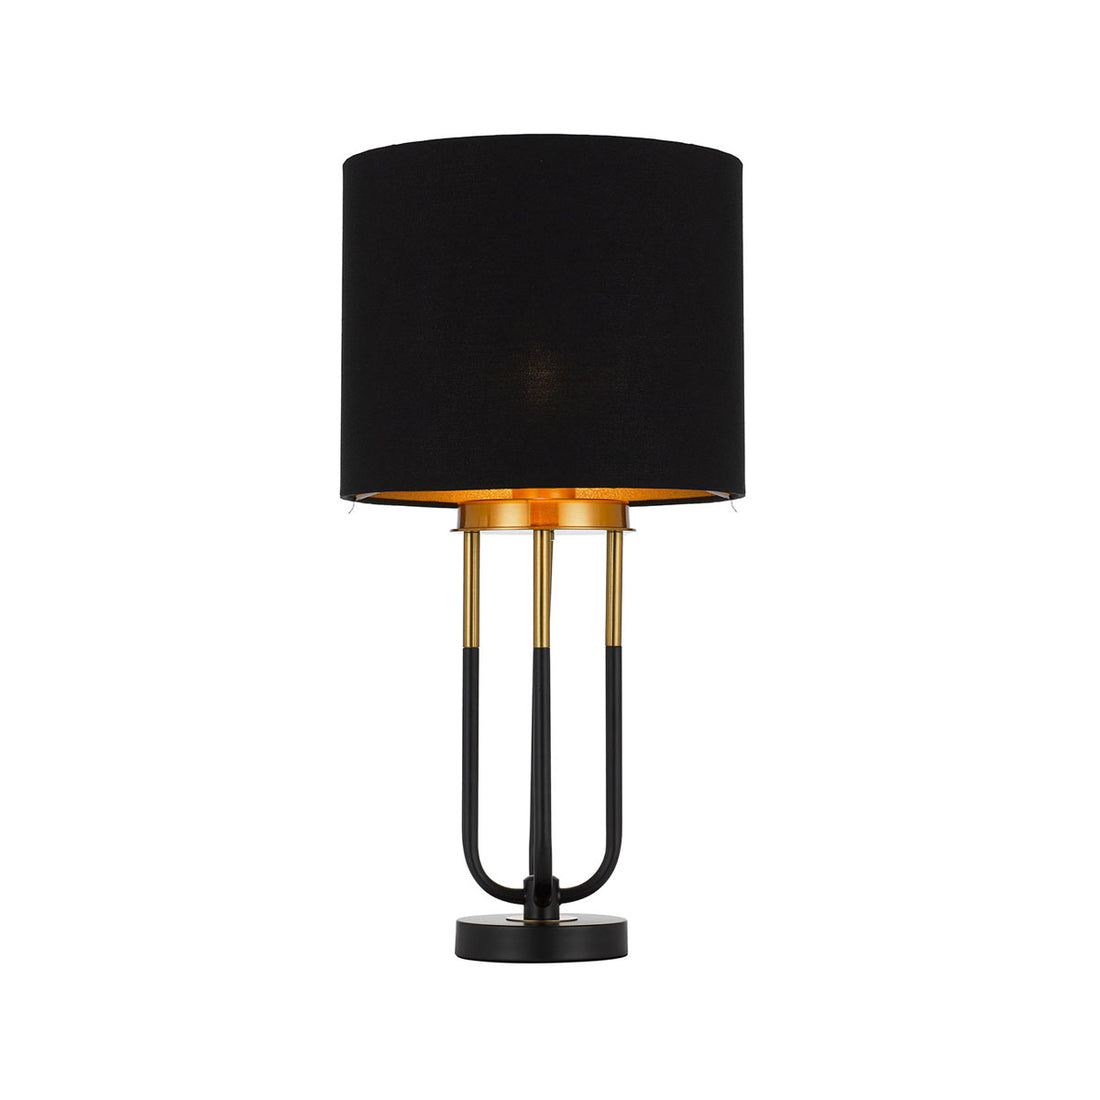 Negas Black with Antique Gold Modern Table Lamp